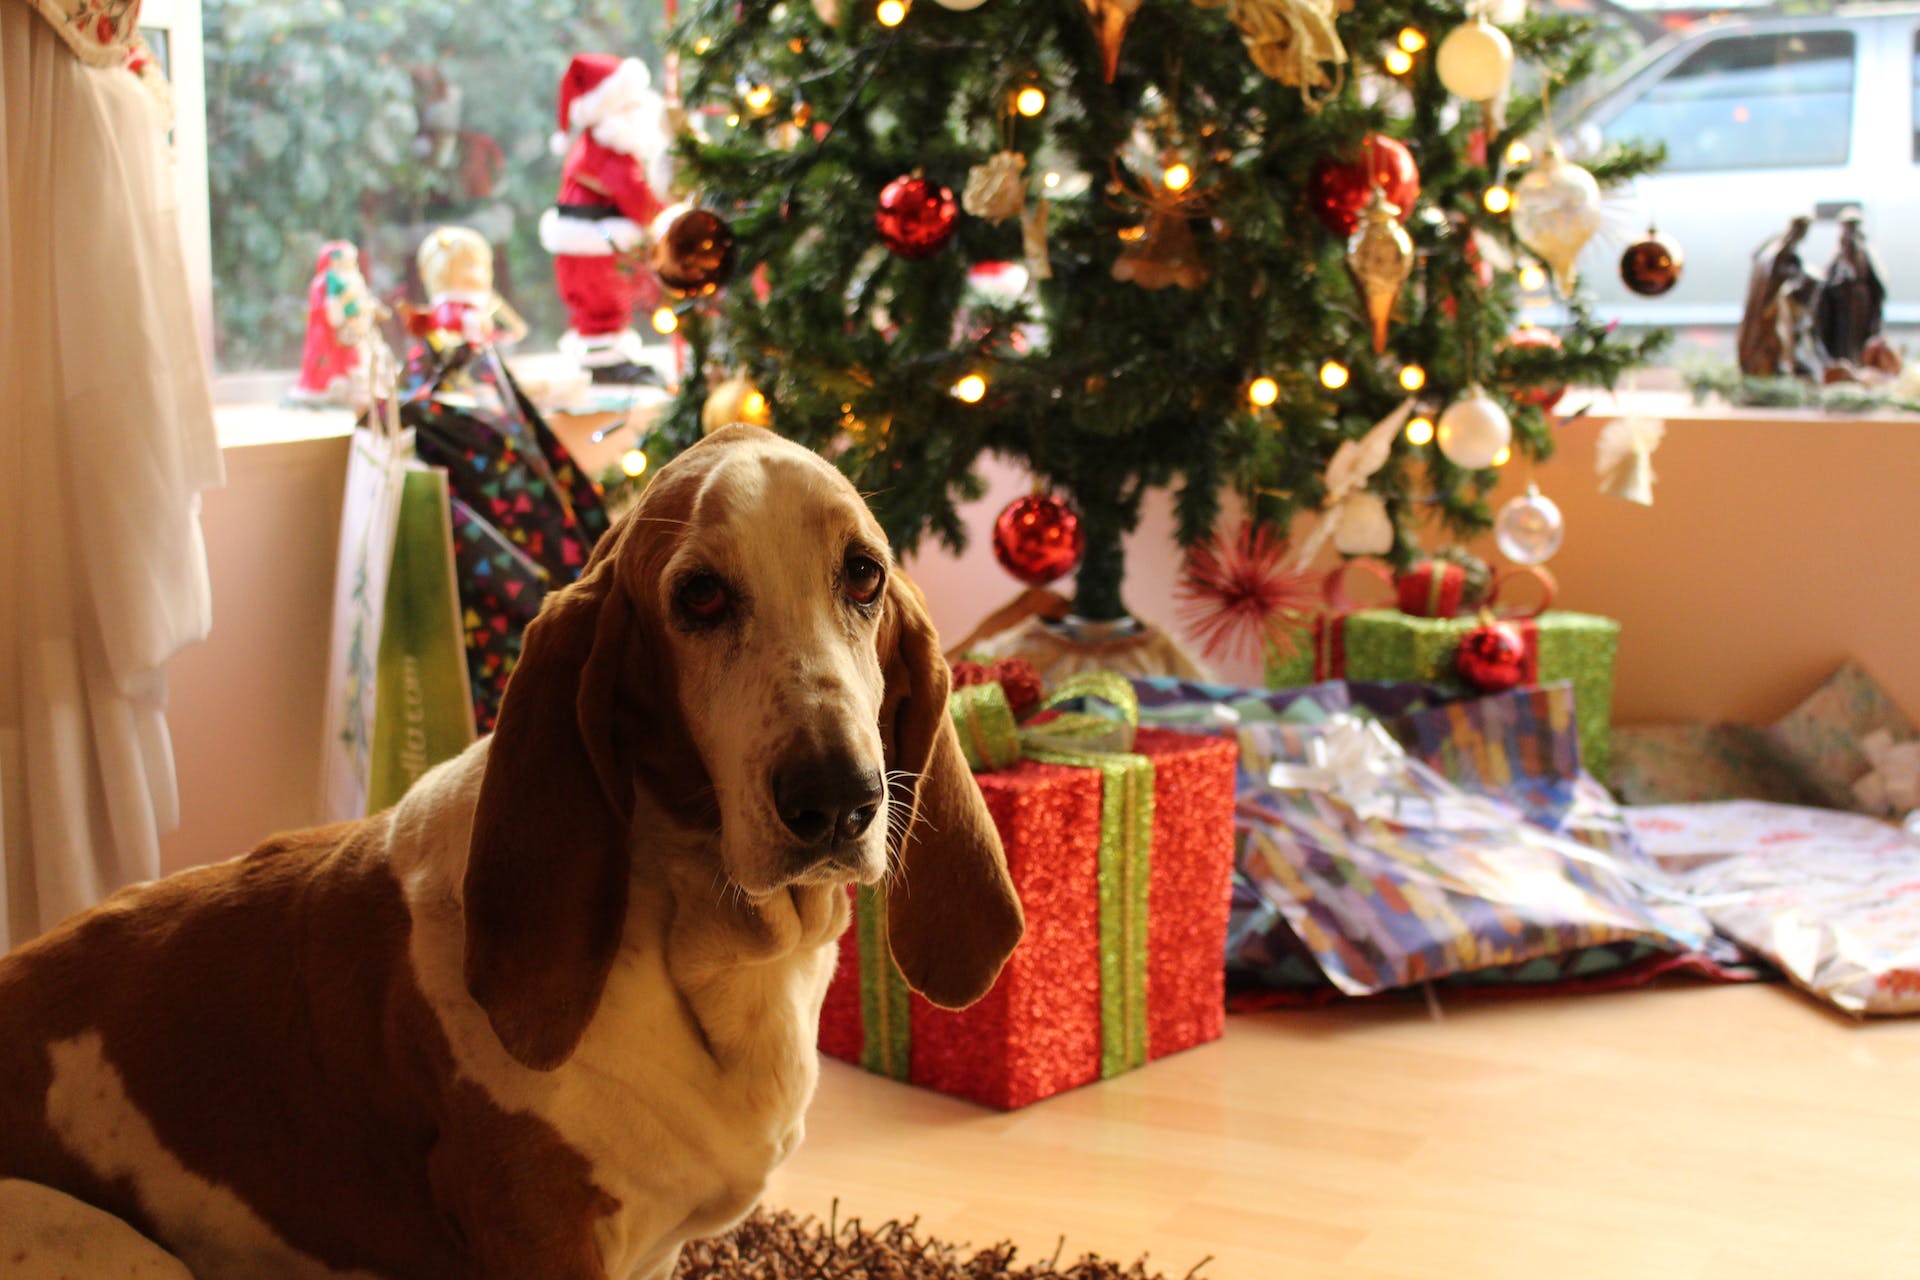 A dog sitting beside a Christmas tree. | Source: Pexels